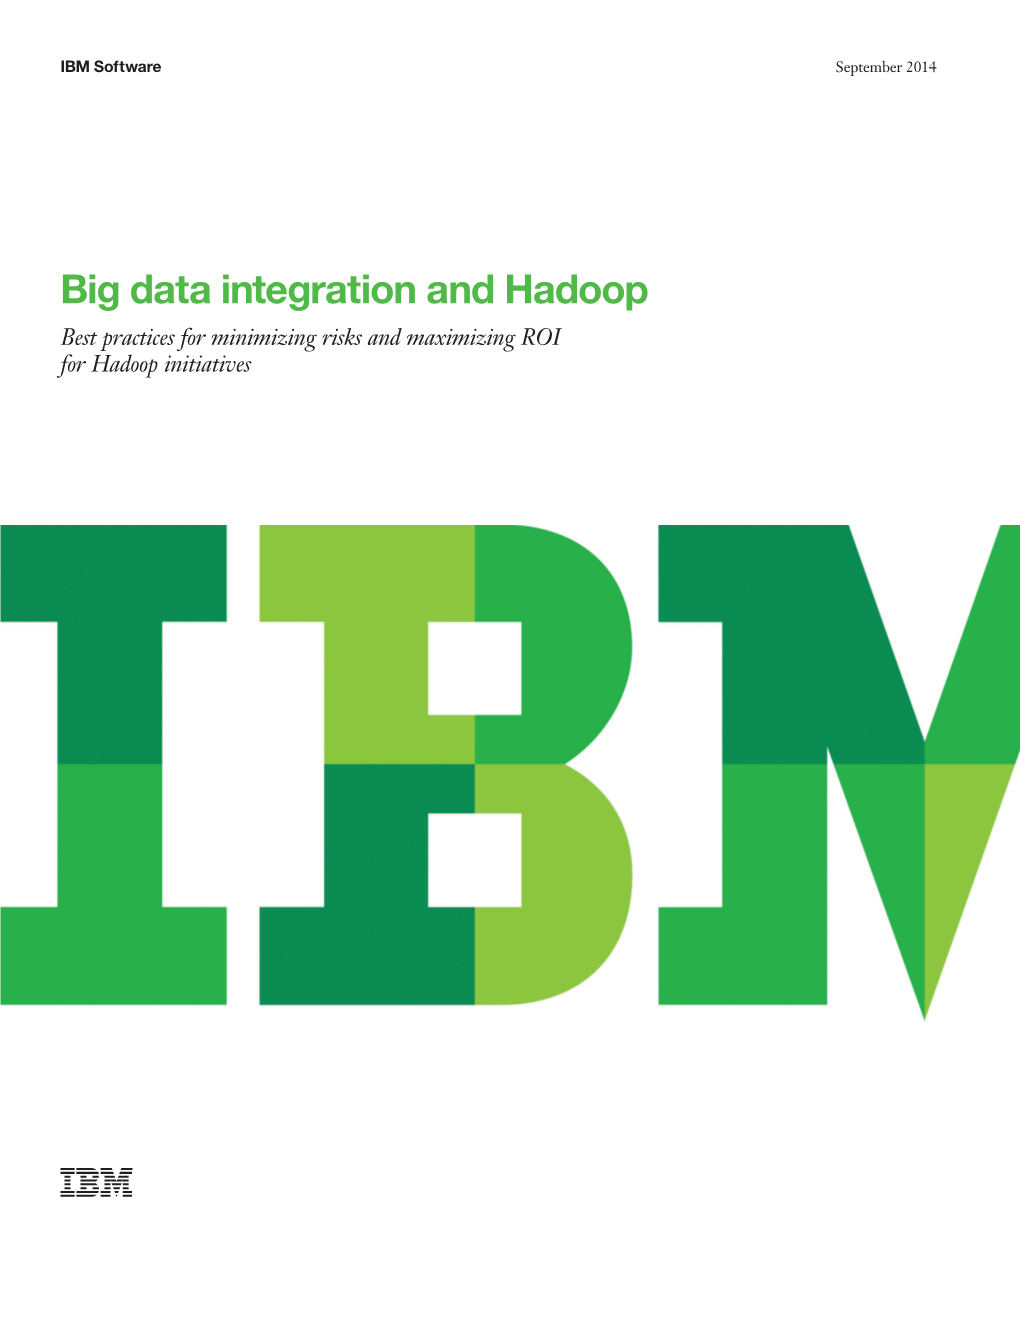 Big Data Integration and Hadoop Best Practices for Minimizing Risks and Maximizing ROI for Hadoop Initiatives 2 Big Data Integration and Hadoop